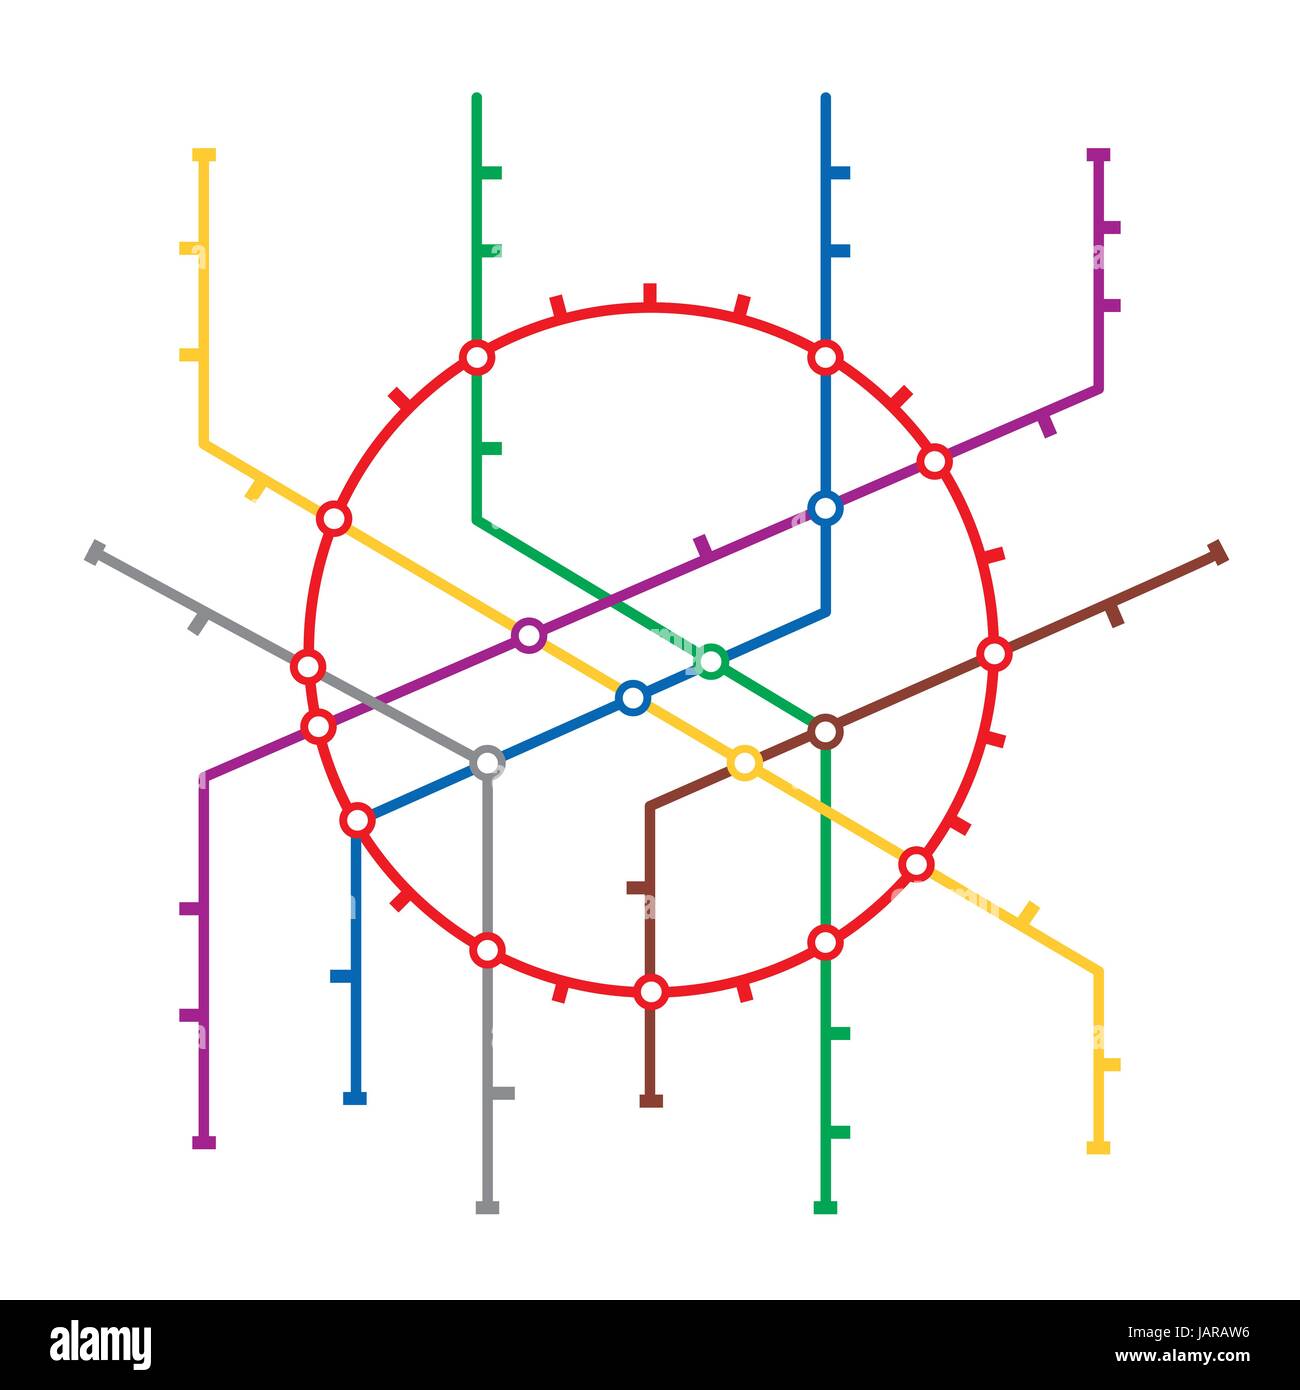 Metro Map Vector. Subway Map Design Template. Colorful Background With Stations. Stock Vector